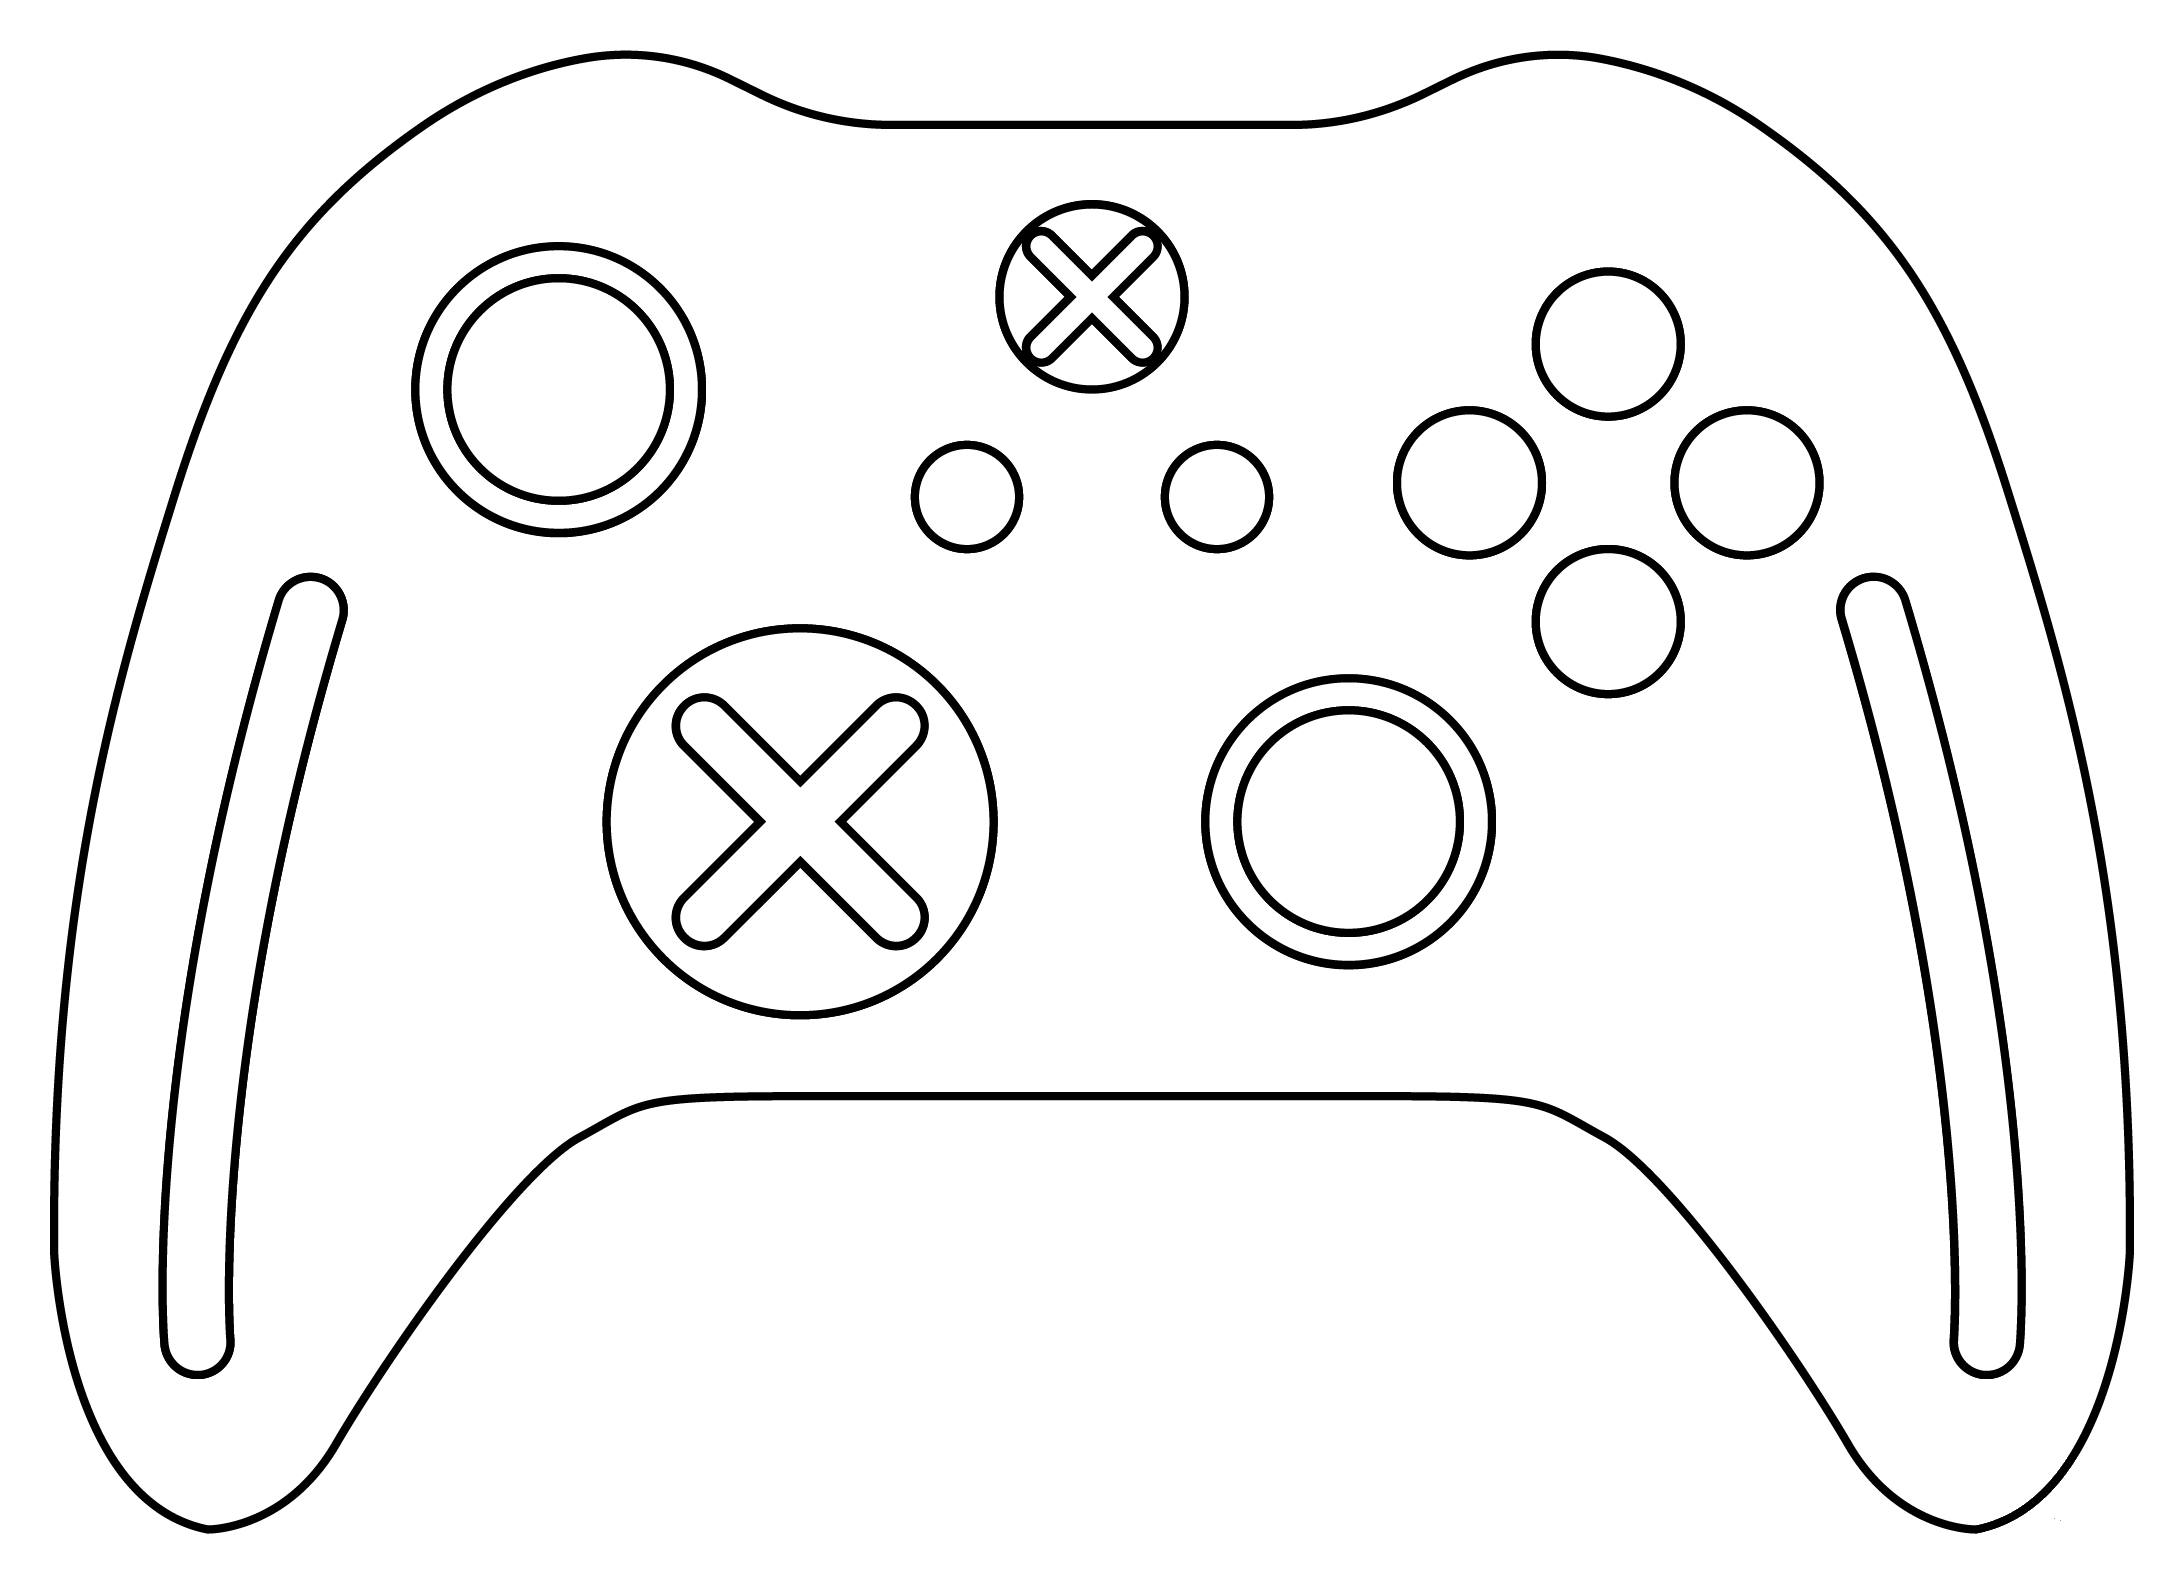 Xbox Controller coloring page - ColouringPages